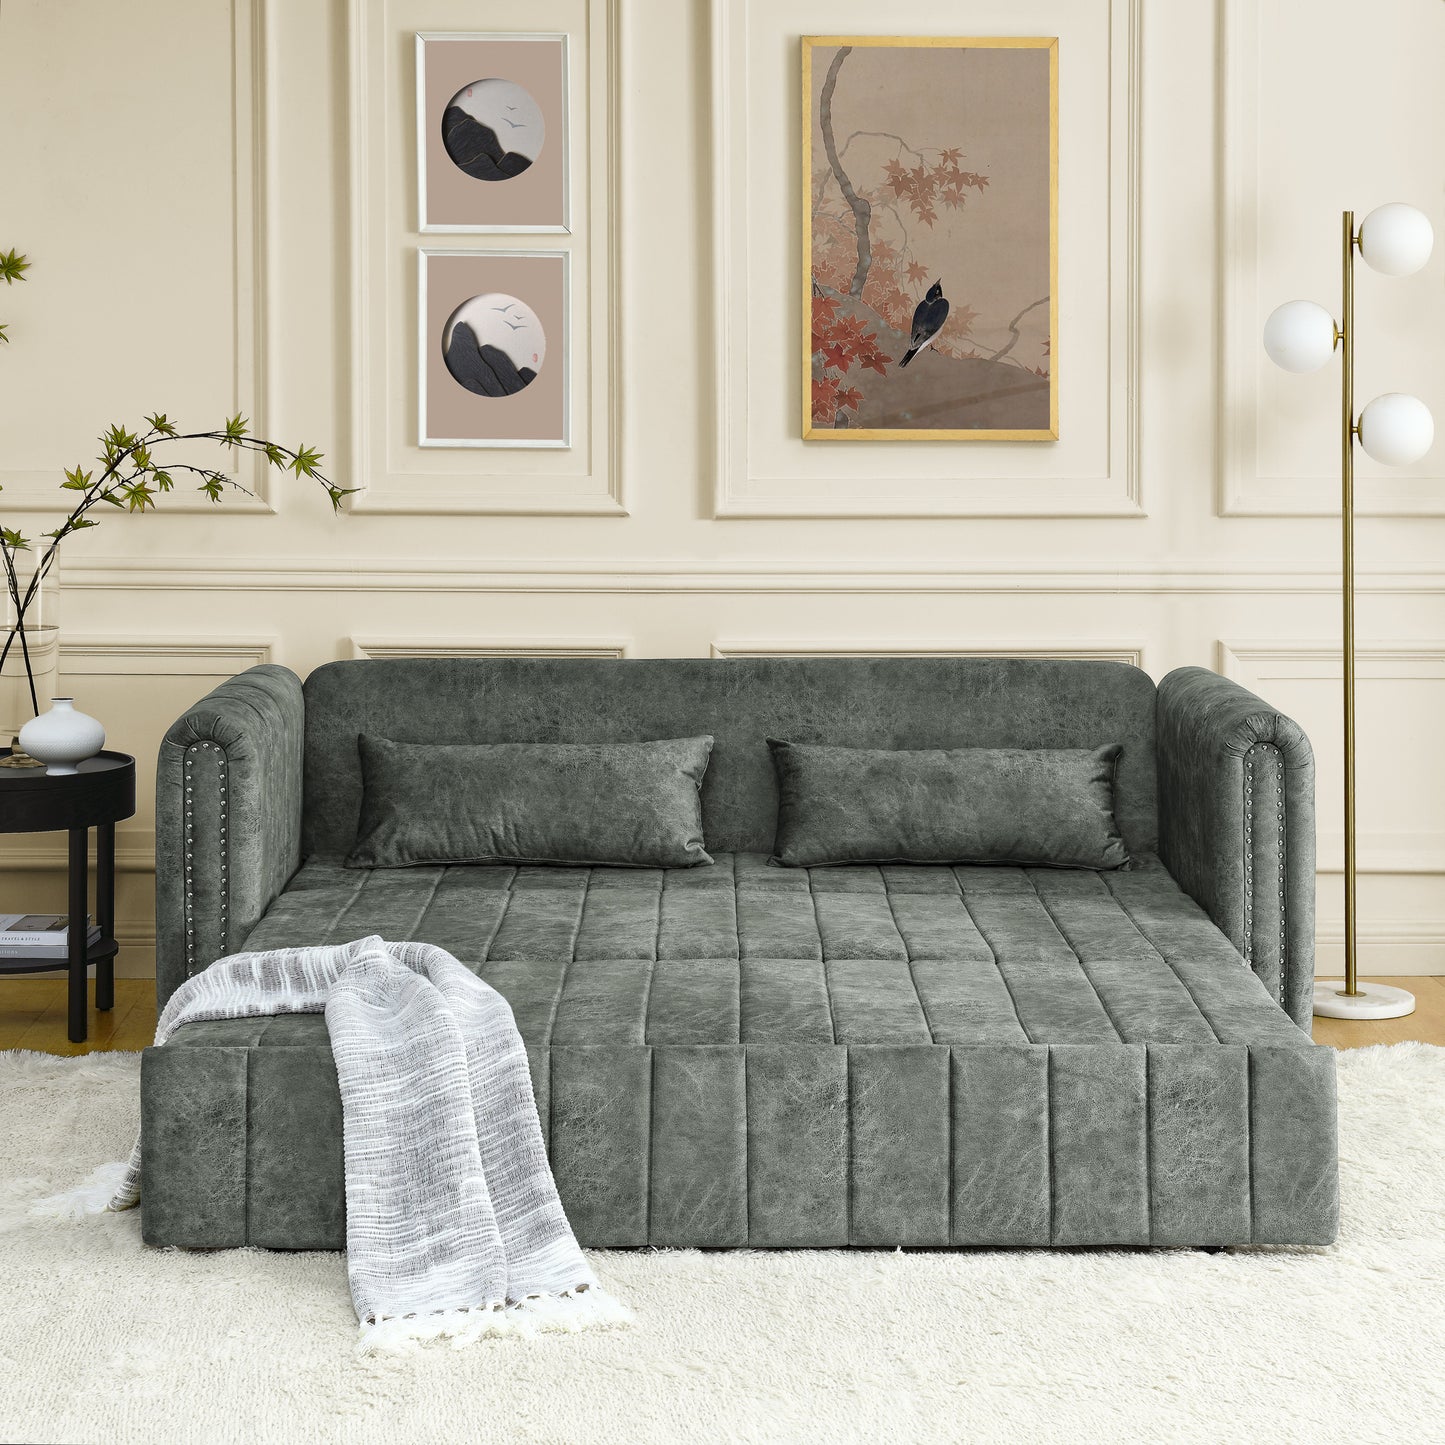 3 in 1 Pull-Out Bed Sleeper, Modern Upholstered 3 Seats Lounge Sofa & Couches with Rolled Arms Decorated with Copper Nails , Convertible Futon 3 Seats Sofabed with Two Drawers and Two Pillows